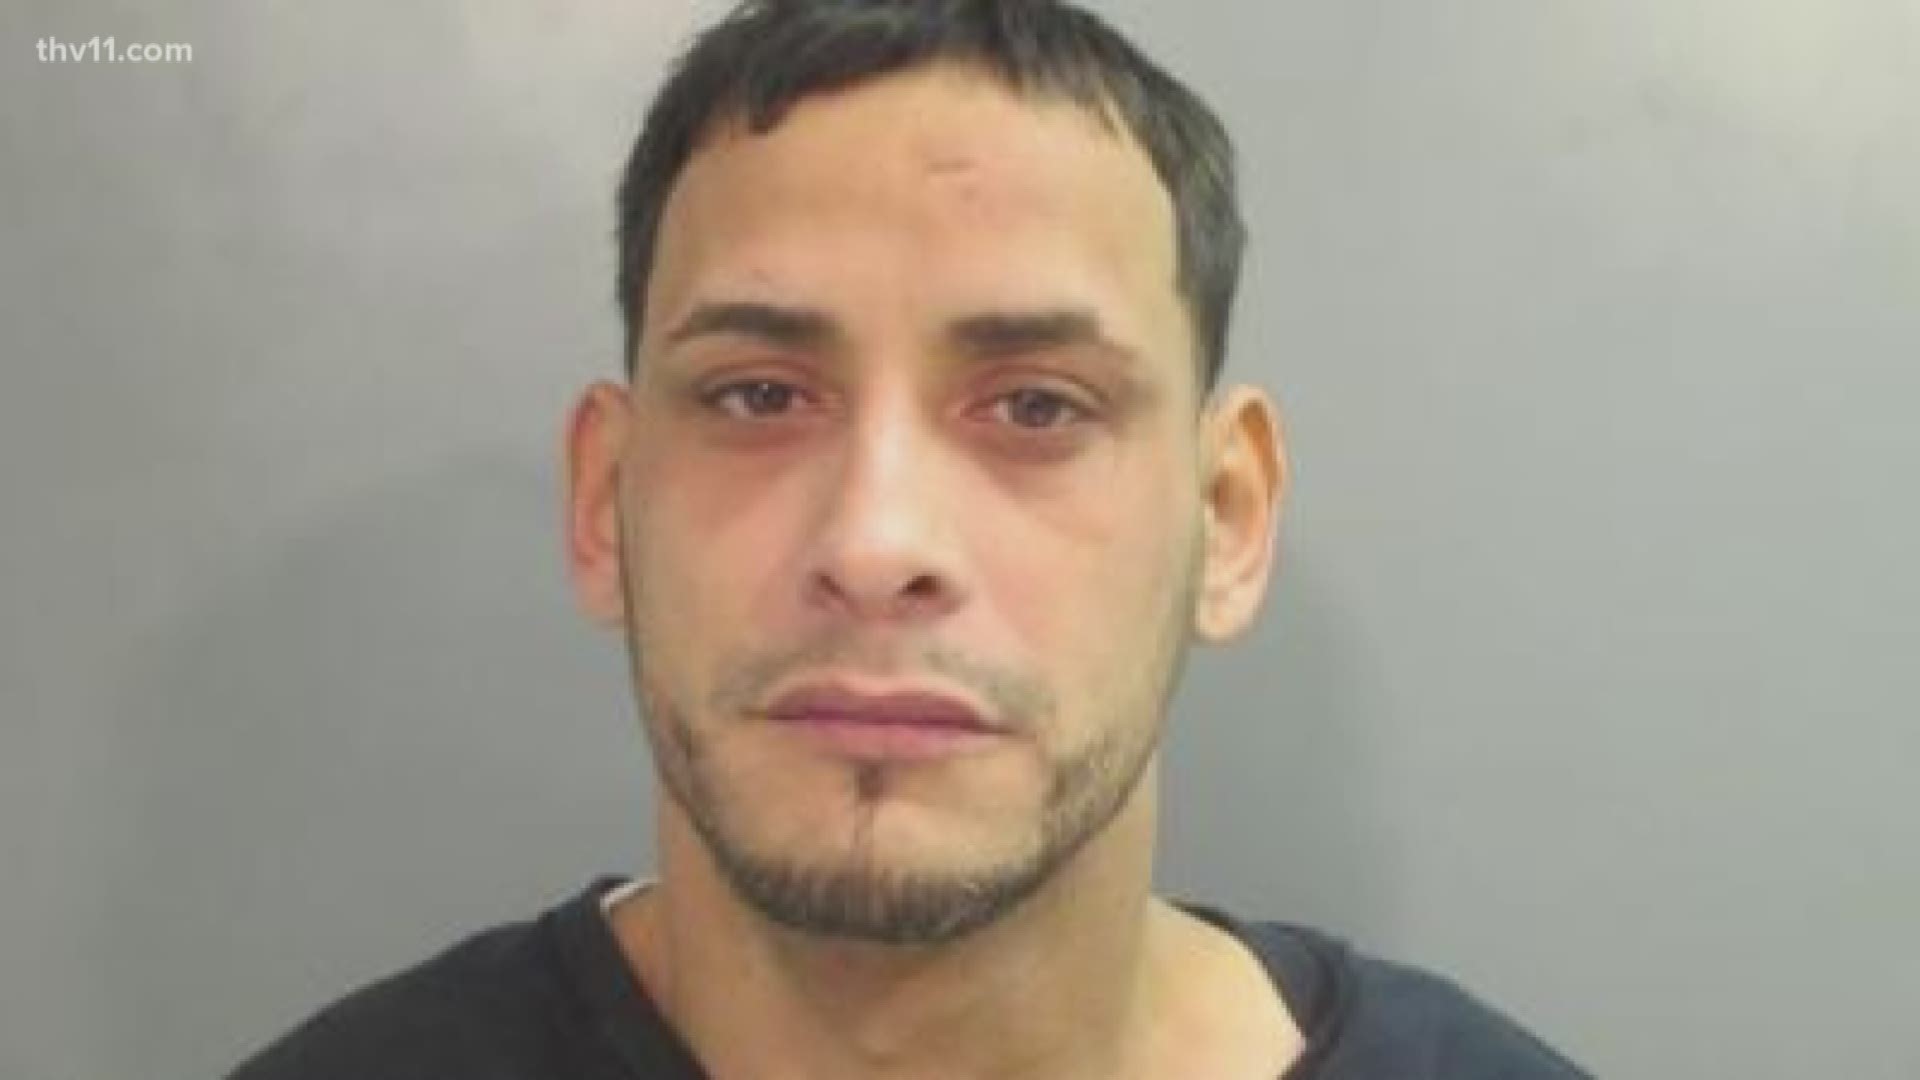 Jackson Rodriguez-Robles, 35, was arrested Tuesday (Dec. 11) in connection with a kidnapping, first-degree domestic battery and aggravated assault on a family or household member.